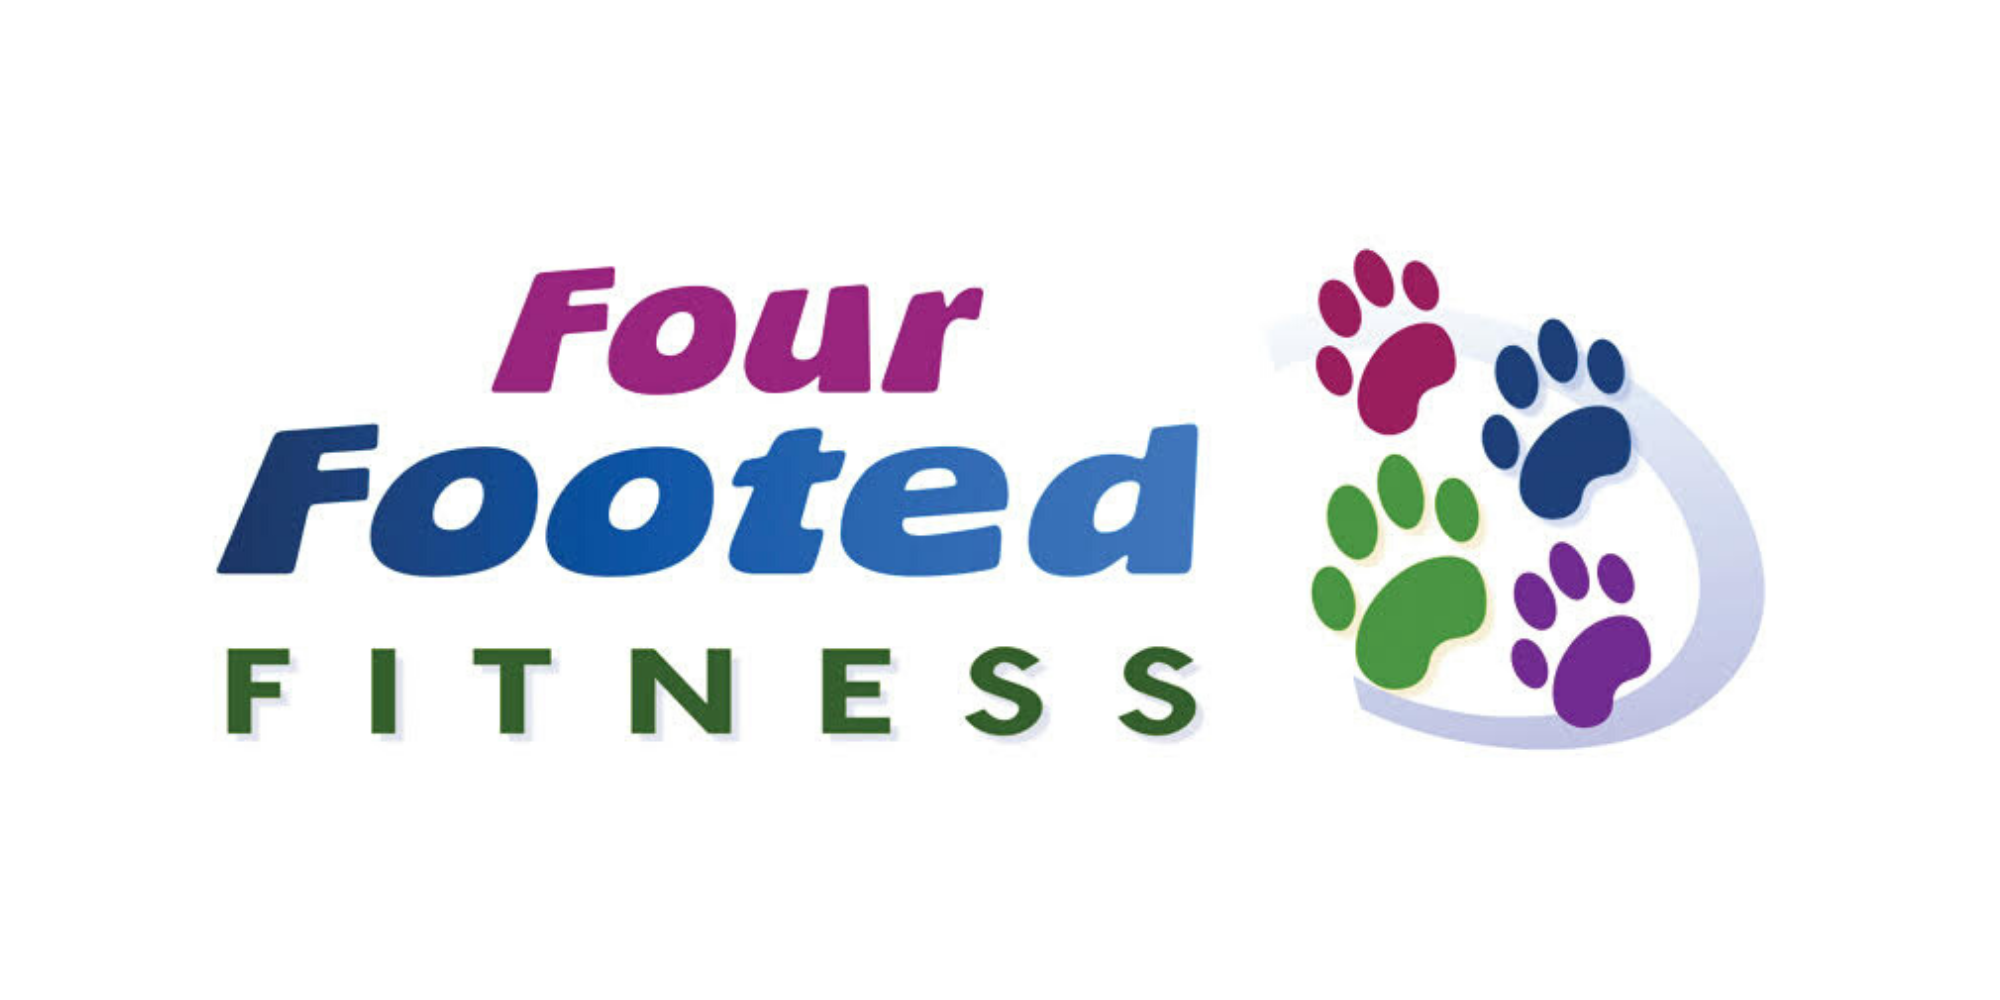 foor-footed-fitness-logo-summary.png